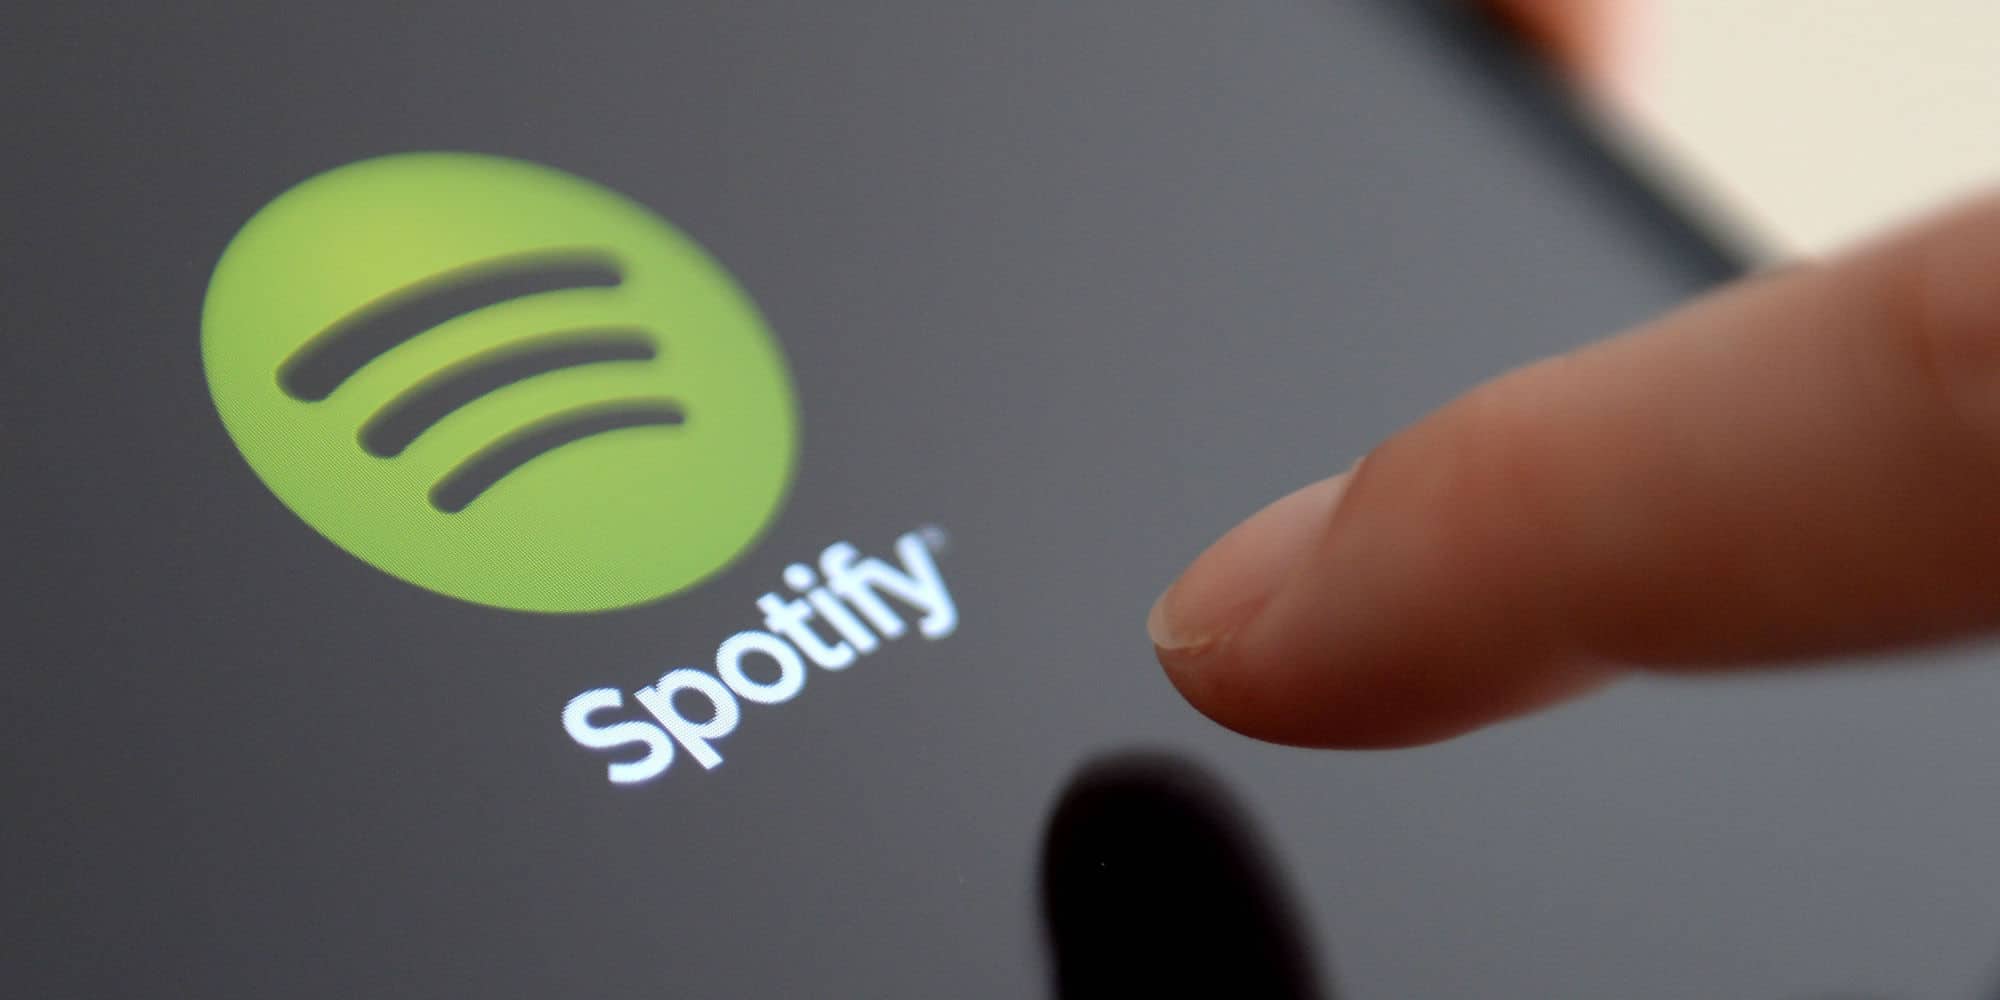 Spotify releases new update with new feature: radar 3